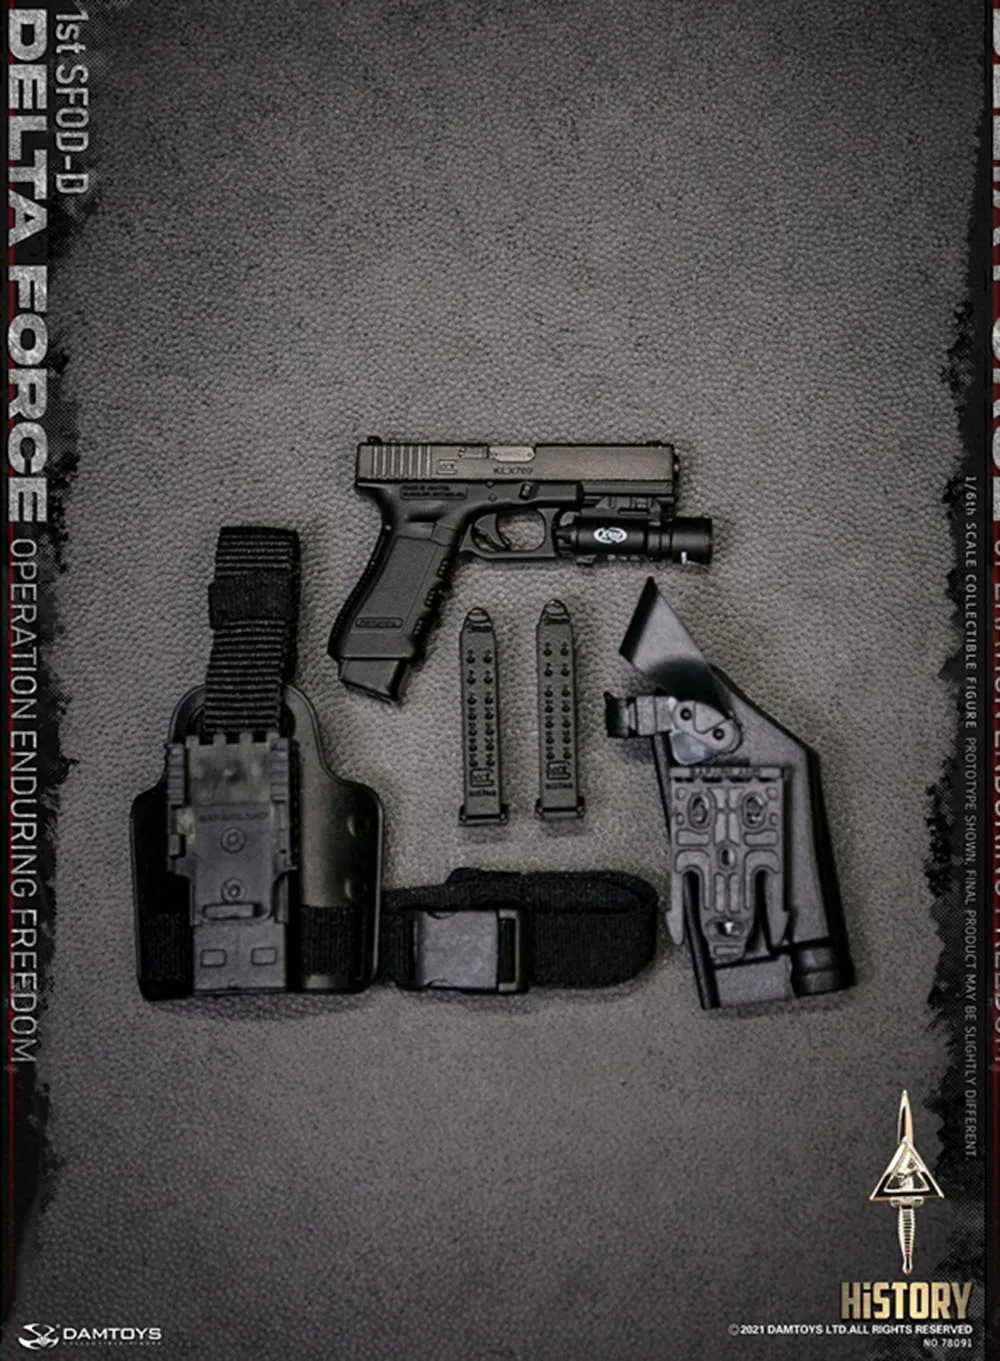 

1/6 DAMTOYS DAM 78091 US. 1st SFOD-D Delta Force Operation Freedom Group the Secondary Weapon G17 Leg Holster For 12" Action DIY